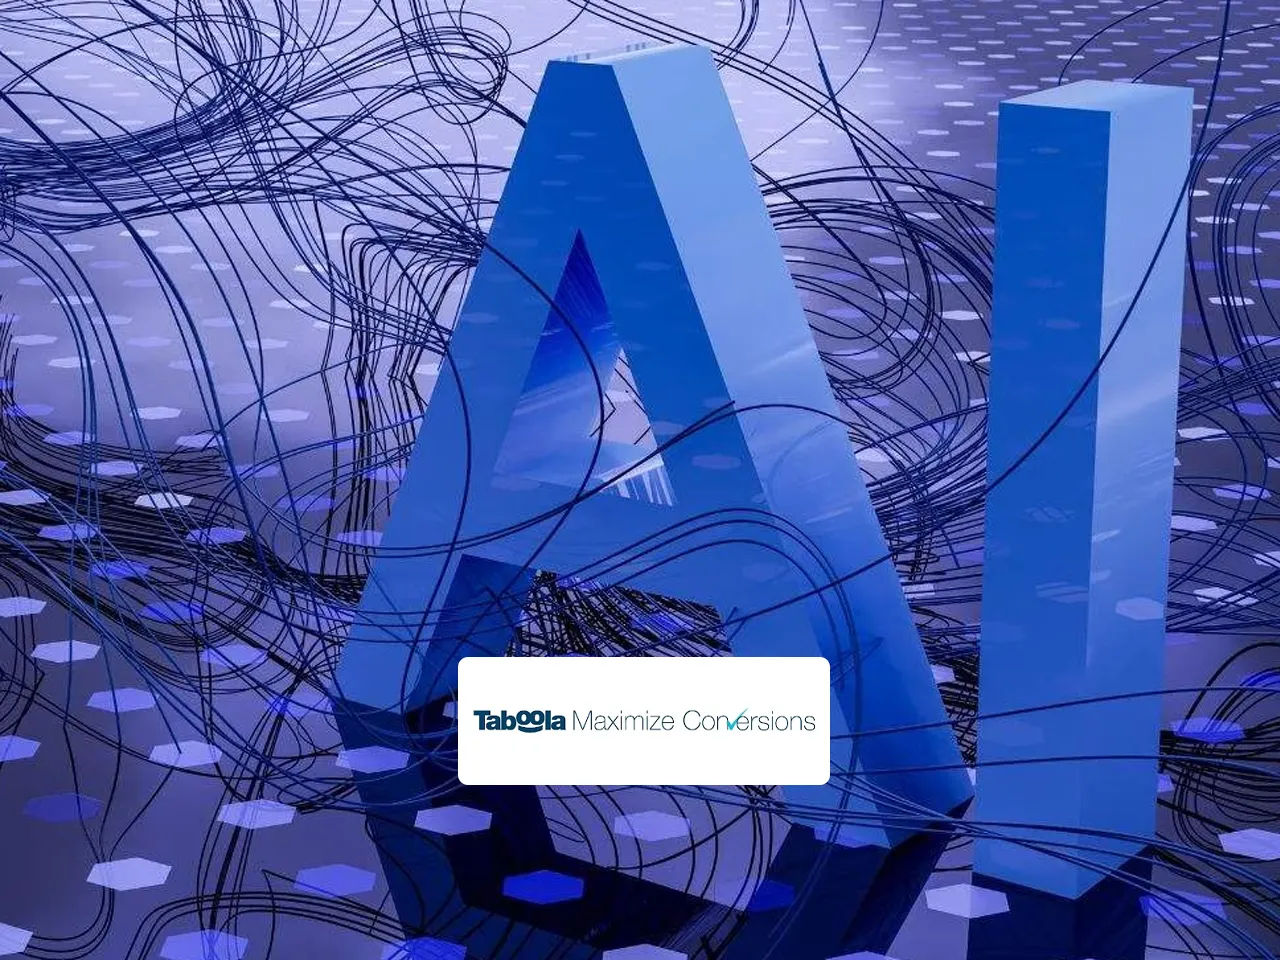 Taboola brings AI advancements to its conversions technology